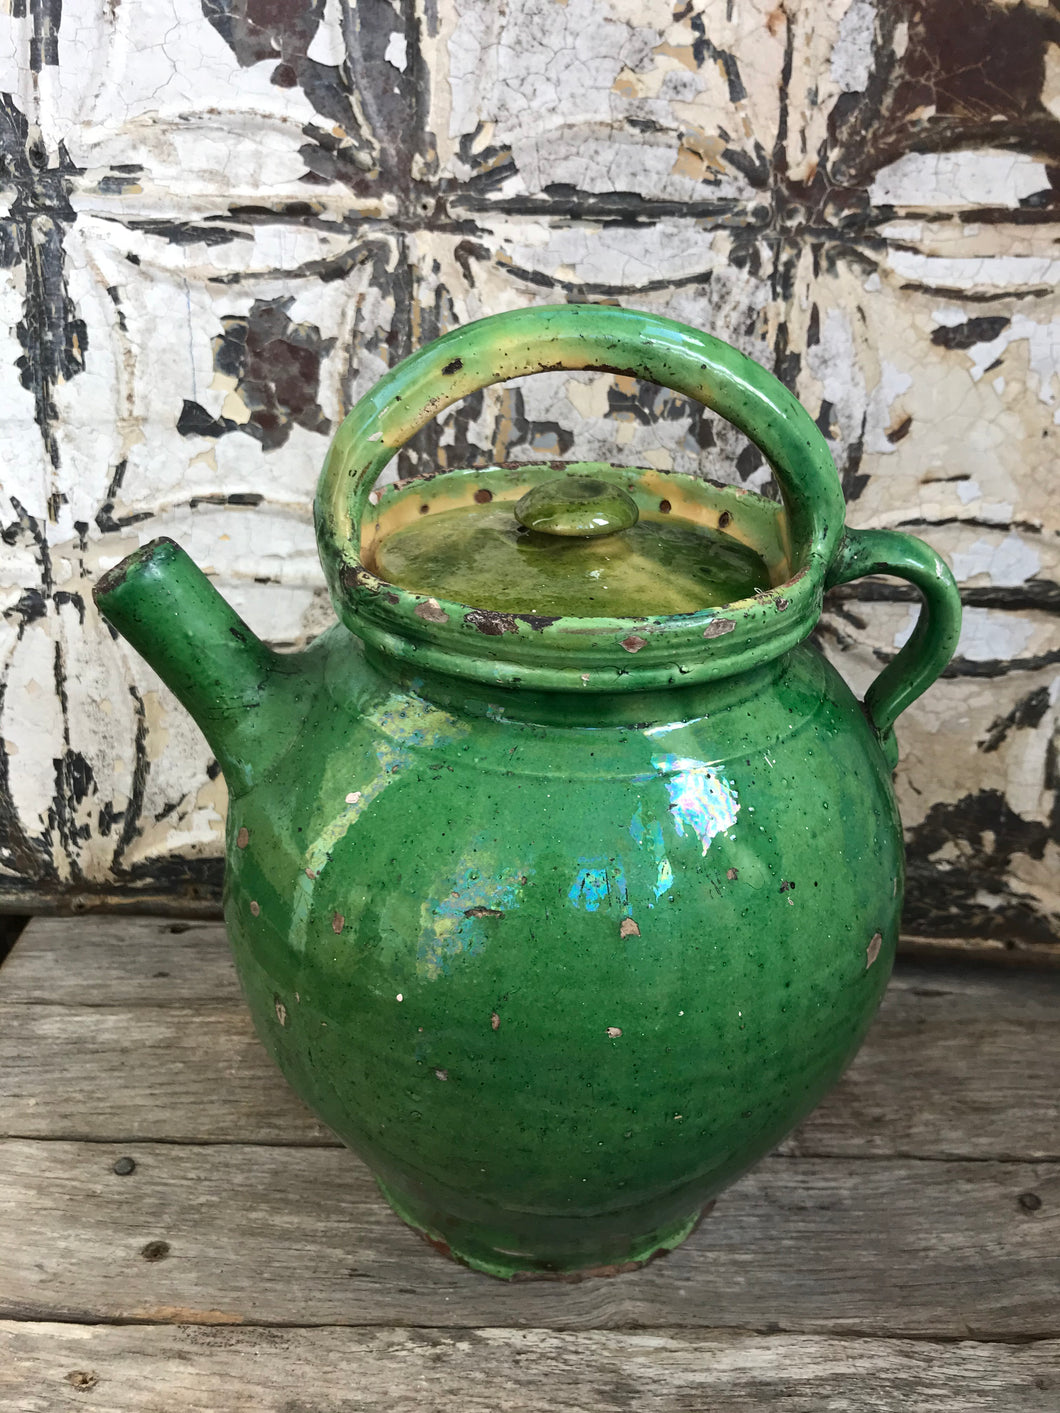 19thC French glazed pitcher with lid